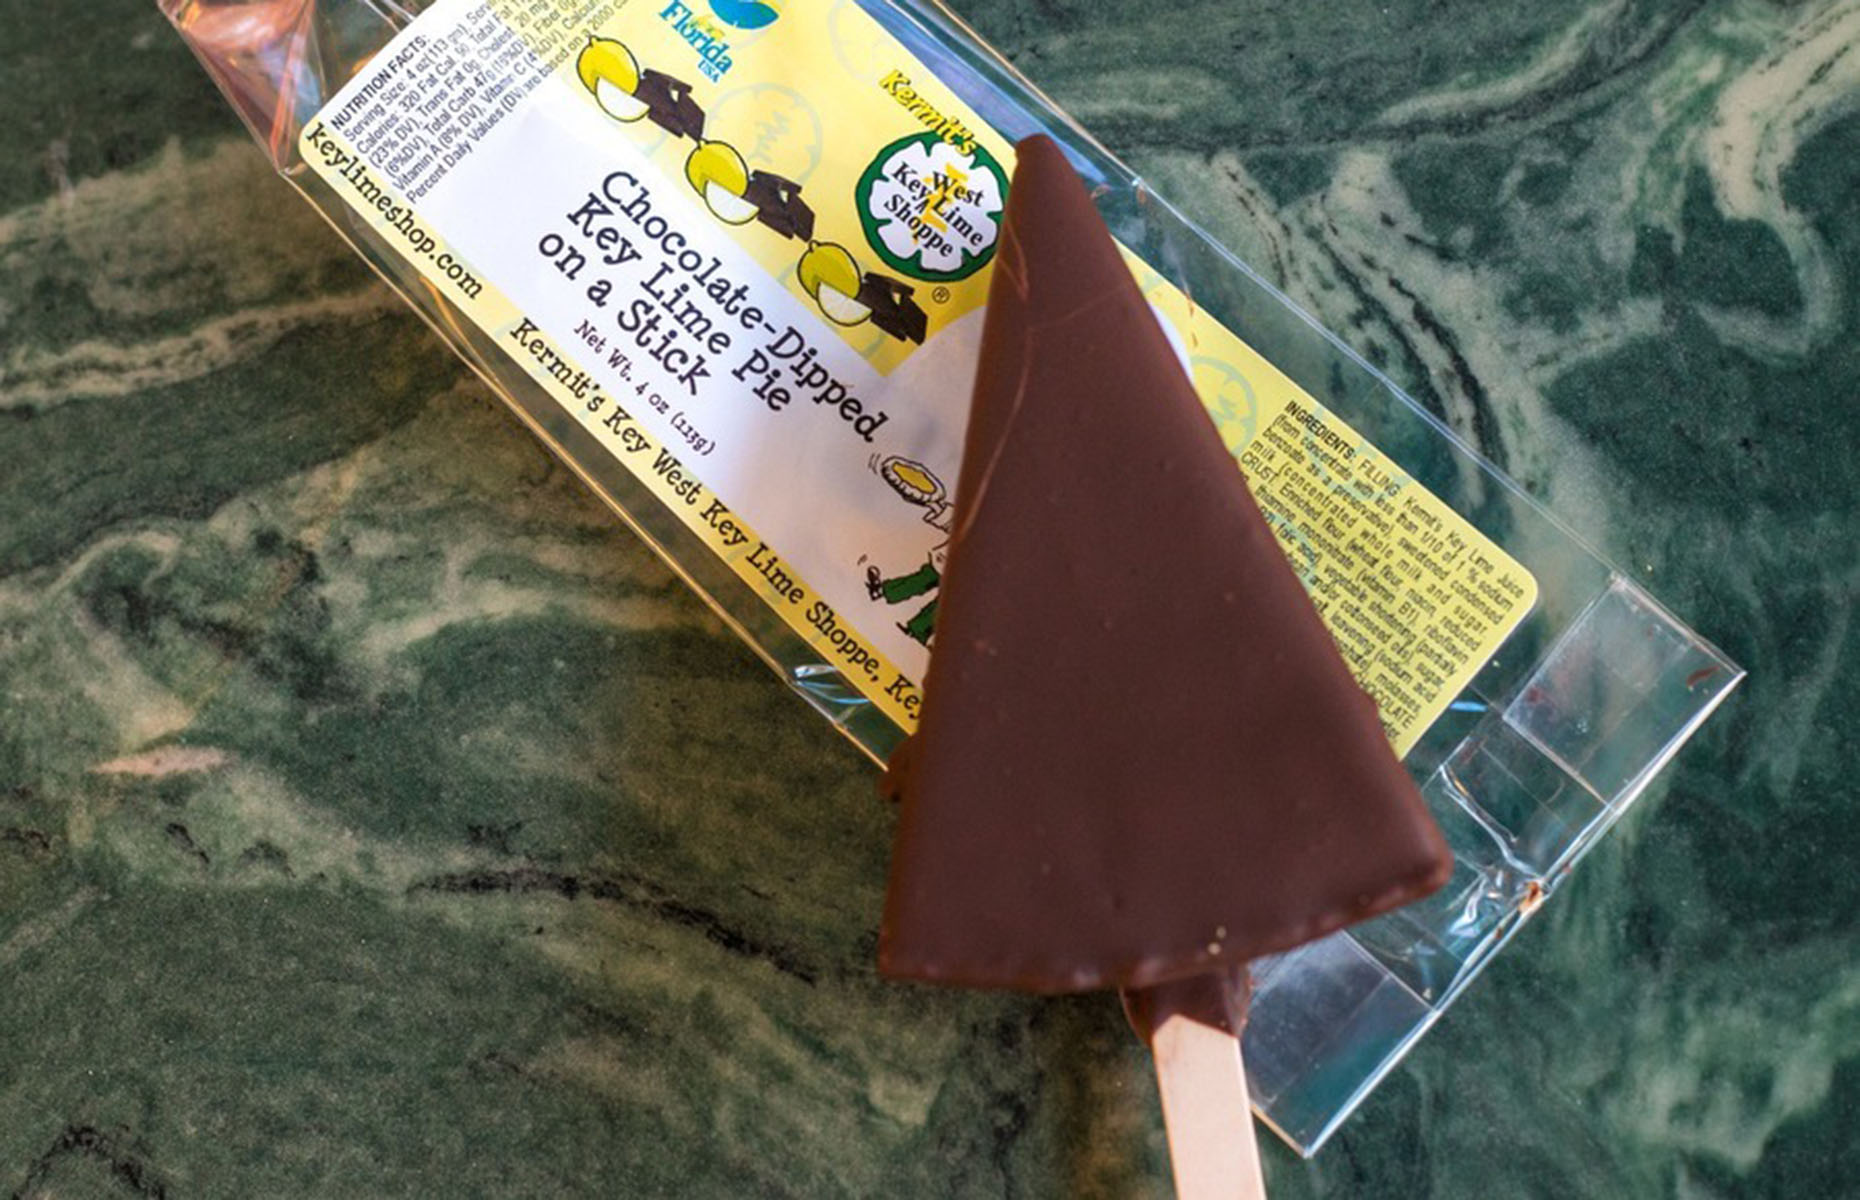 Key Lime Pie dipped in chocolate at Kermit's (Image: Kermit's Key West Key Lime Shoppe/Facebook)